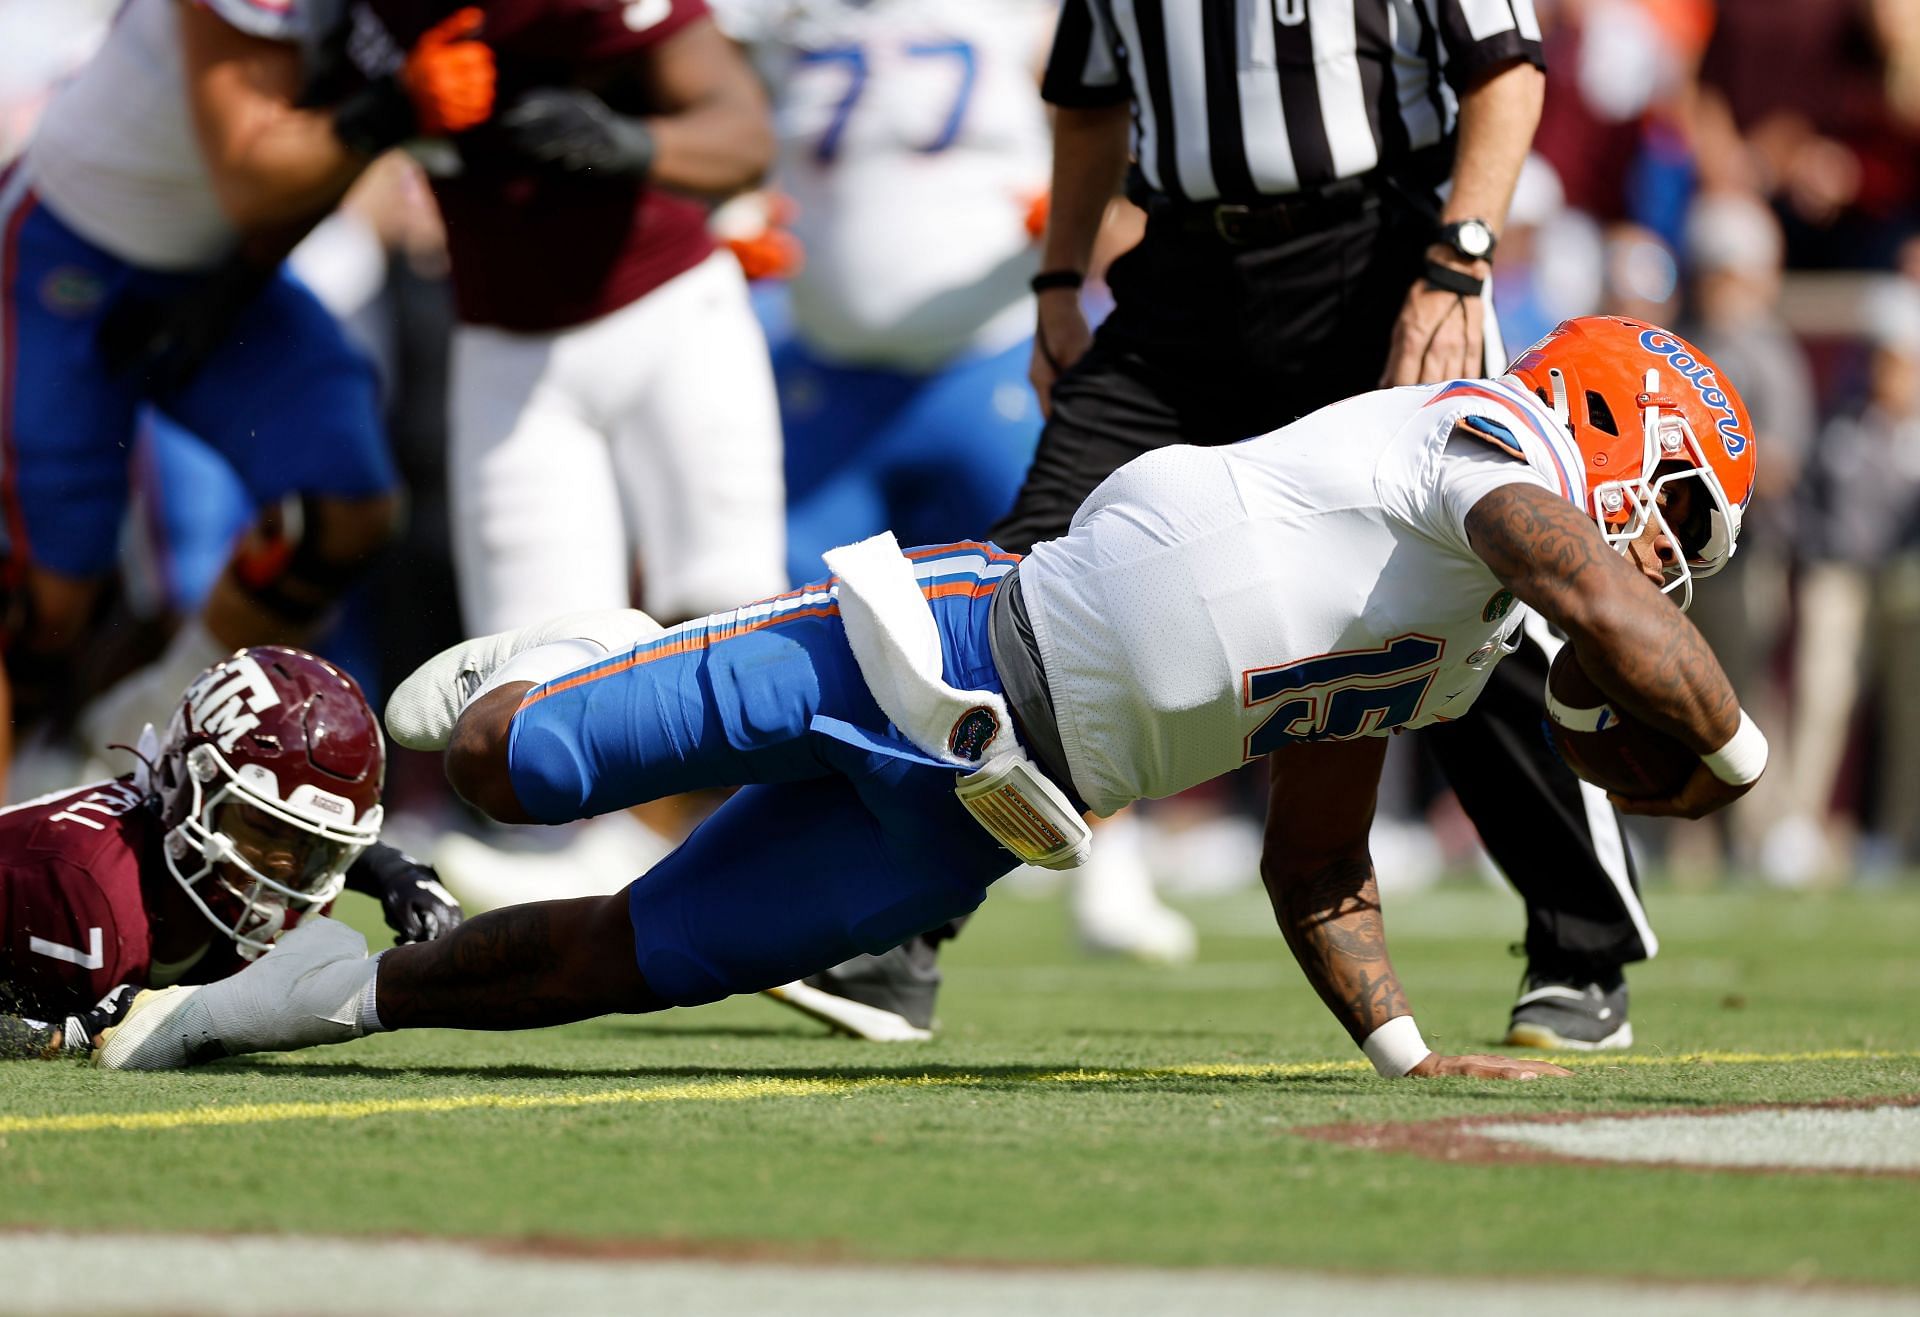  Anthony Richardson #15 of the Florida Gators dives across the goal line for a touchdown in the first quarter against the Texas A&amp;M Aggies 